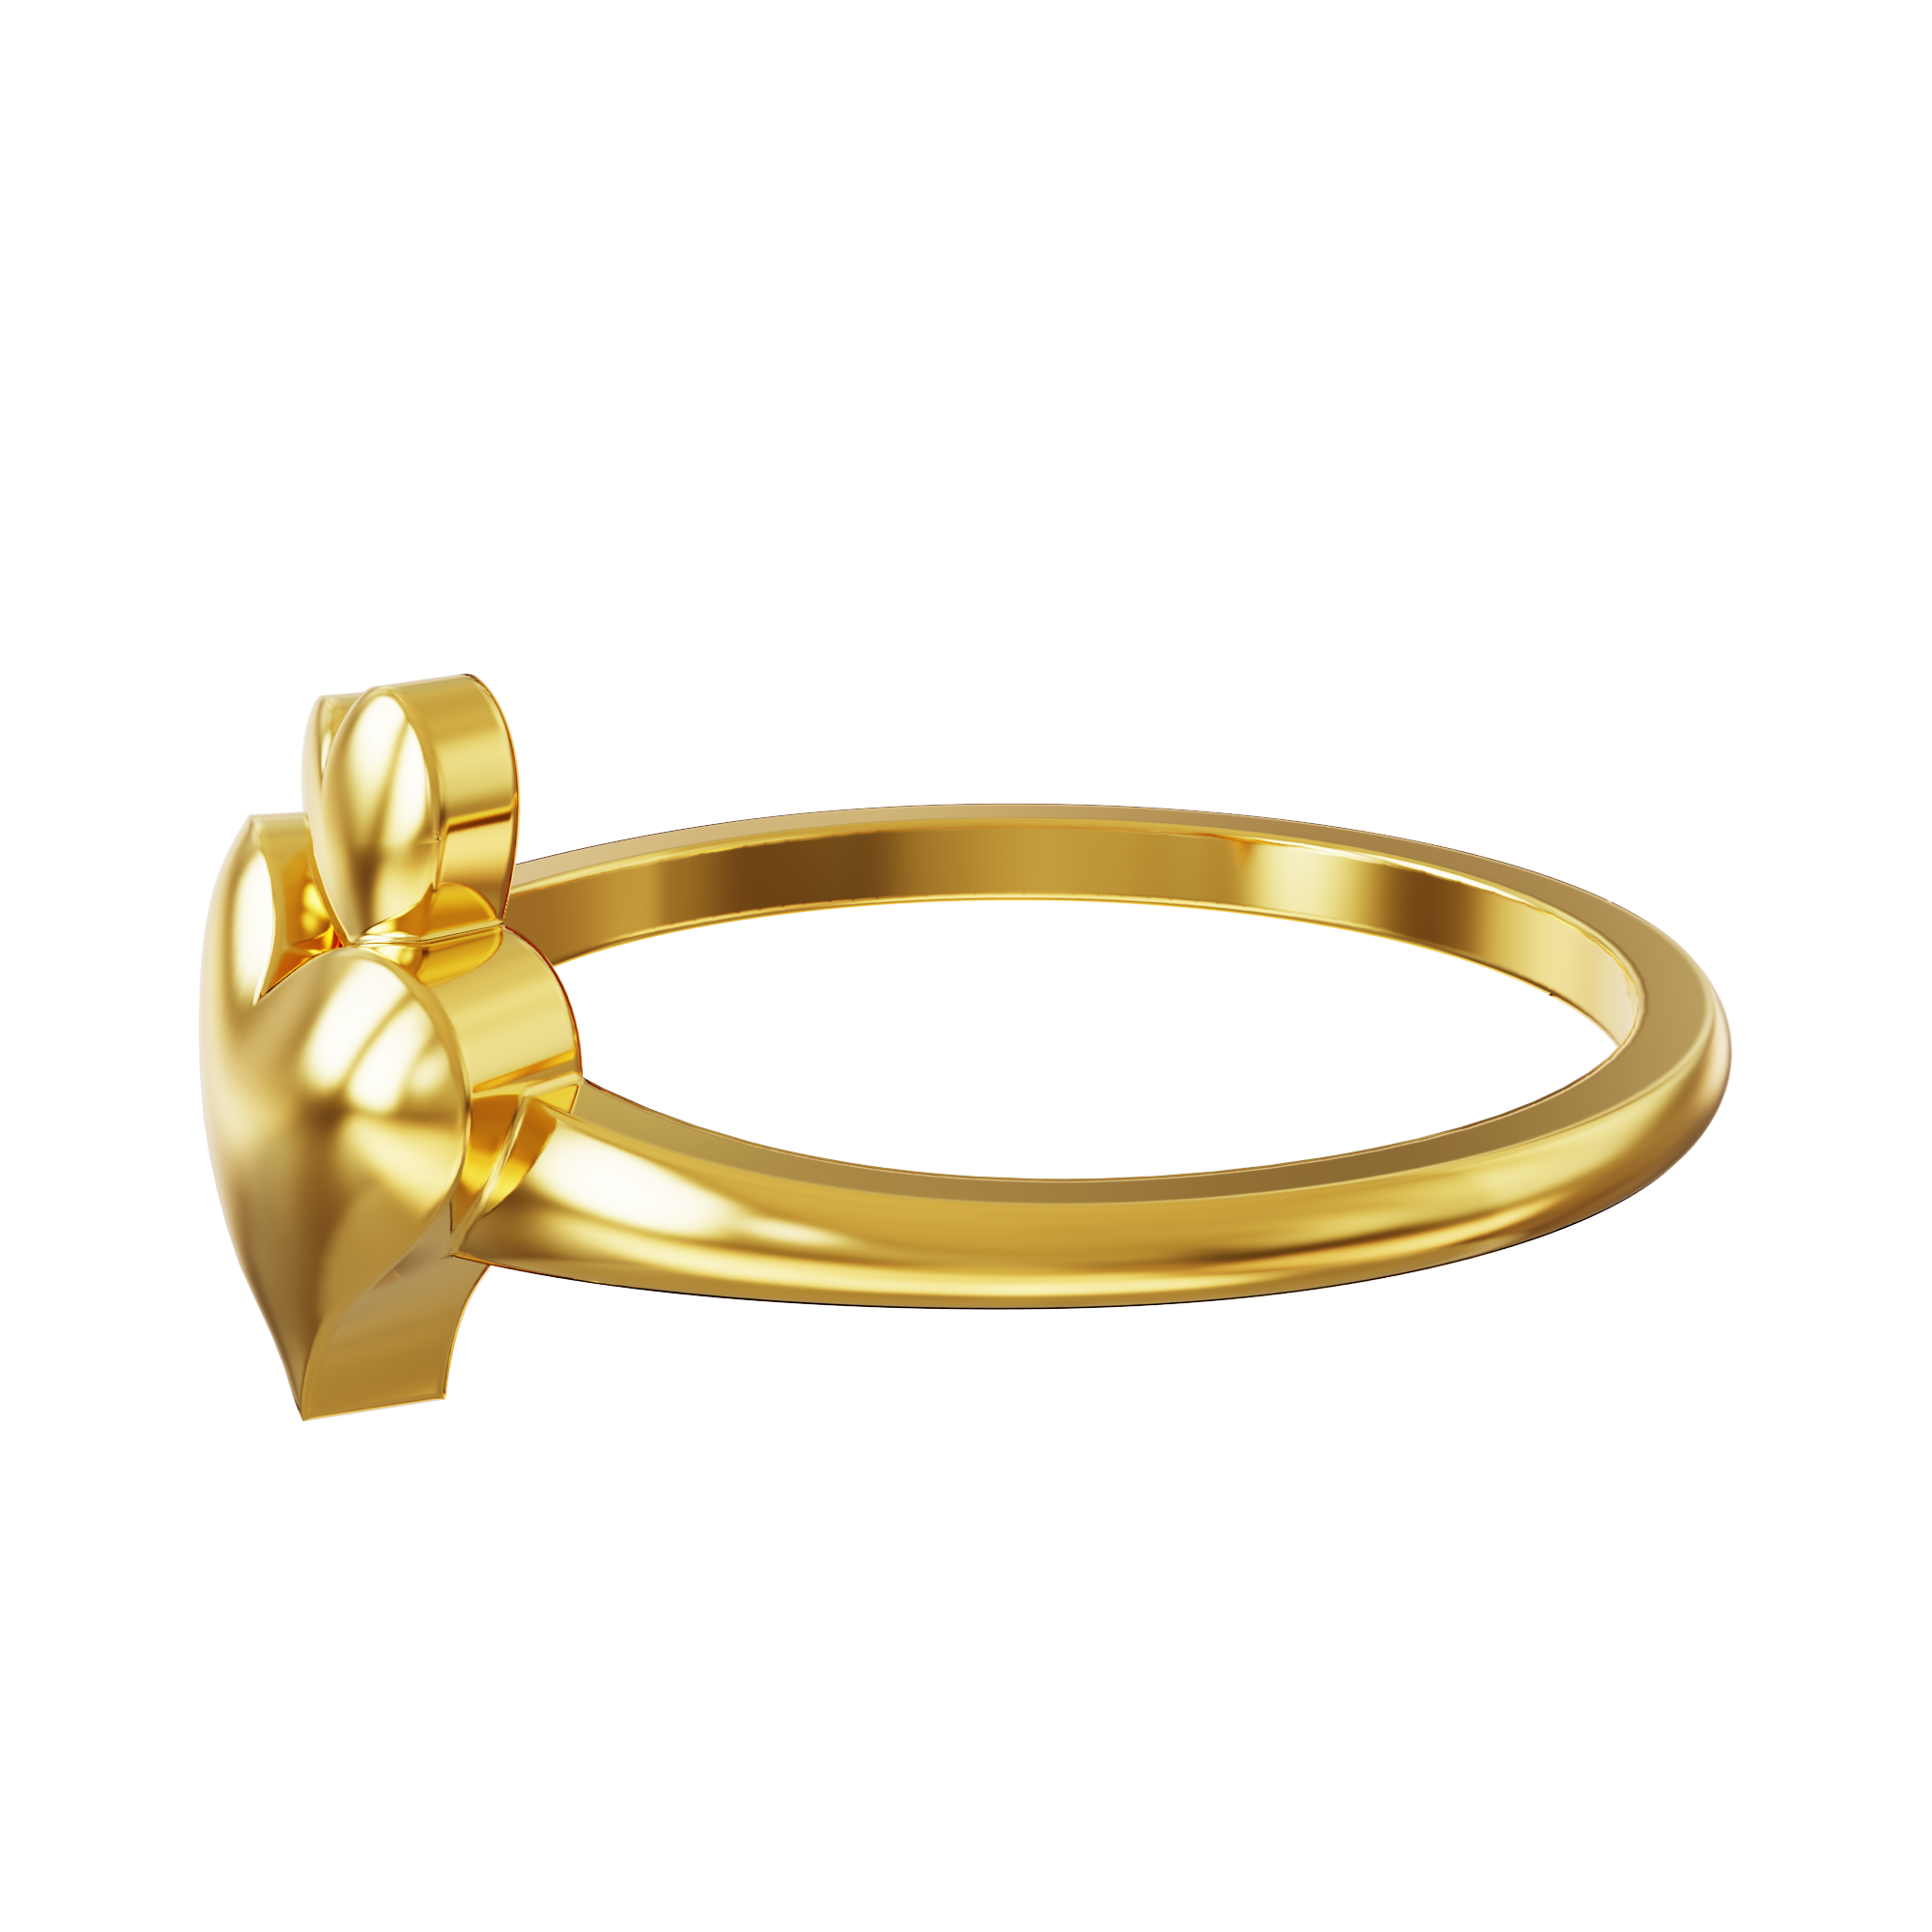 Double-Heart-Design-Gold-Ring-For-Lovers